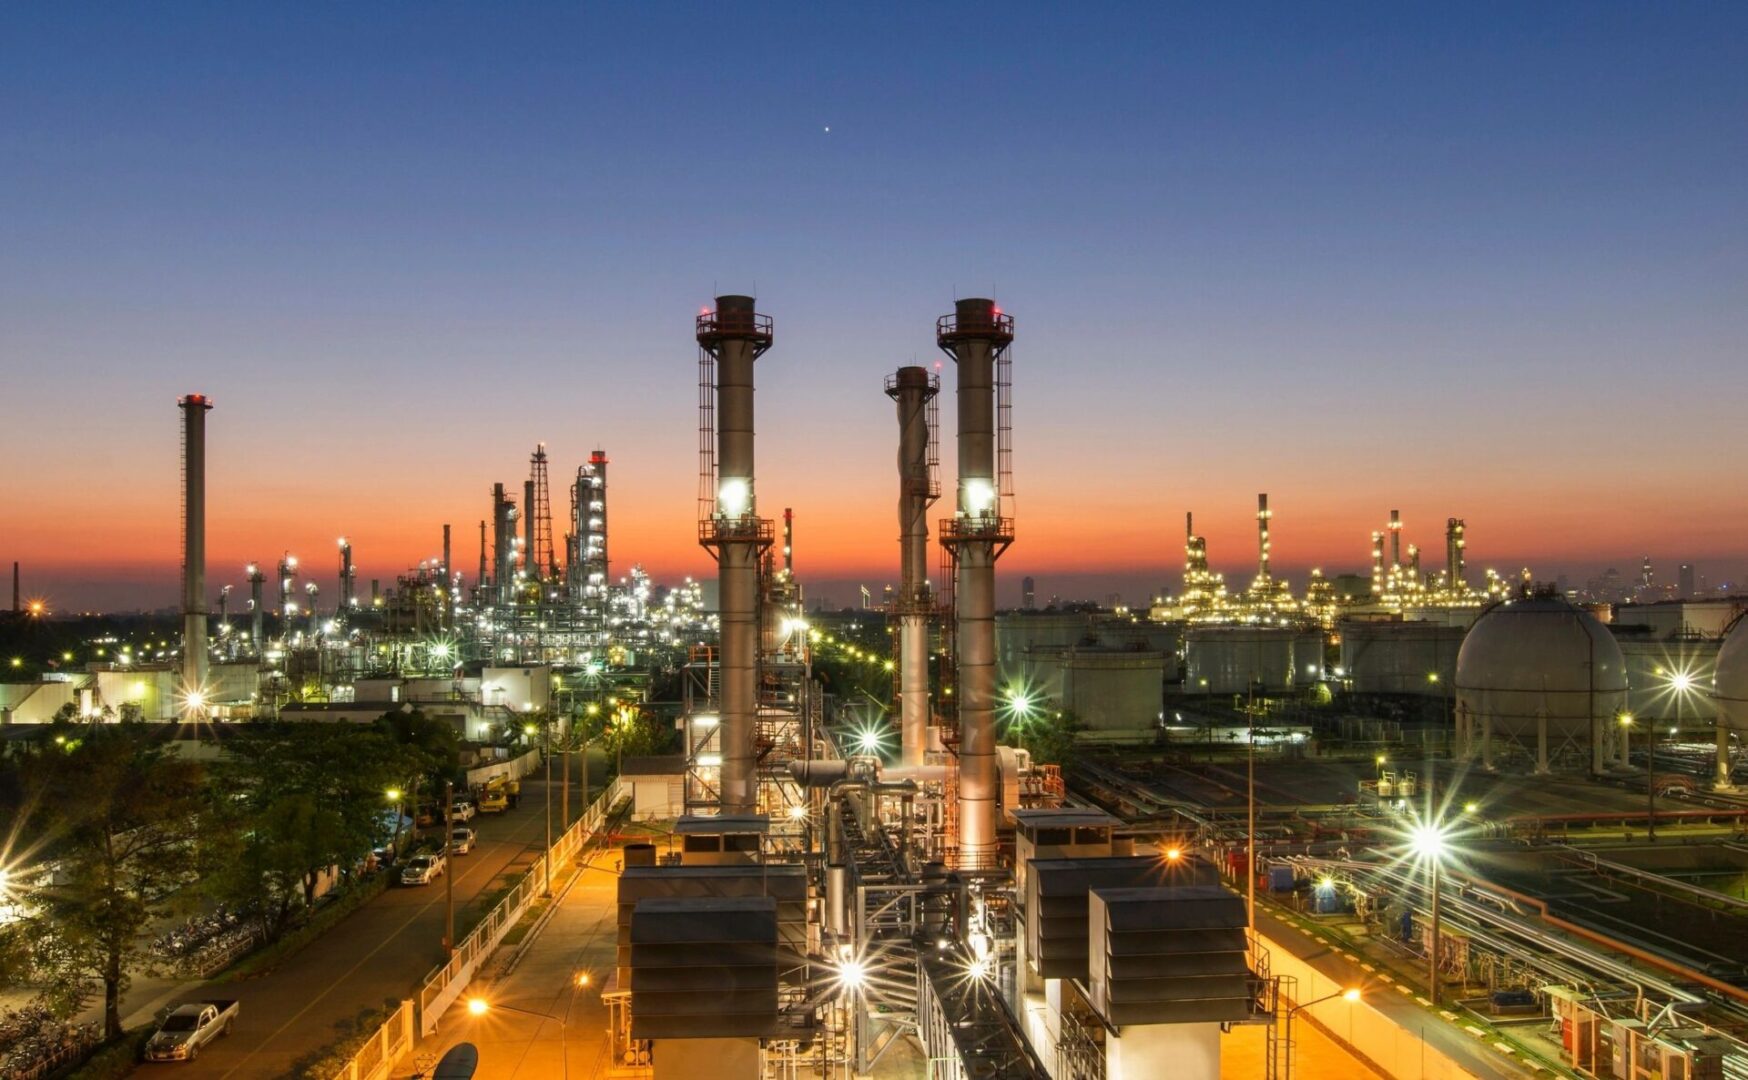 A large oil refinery with lights on at night.